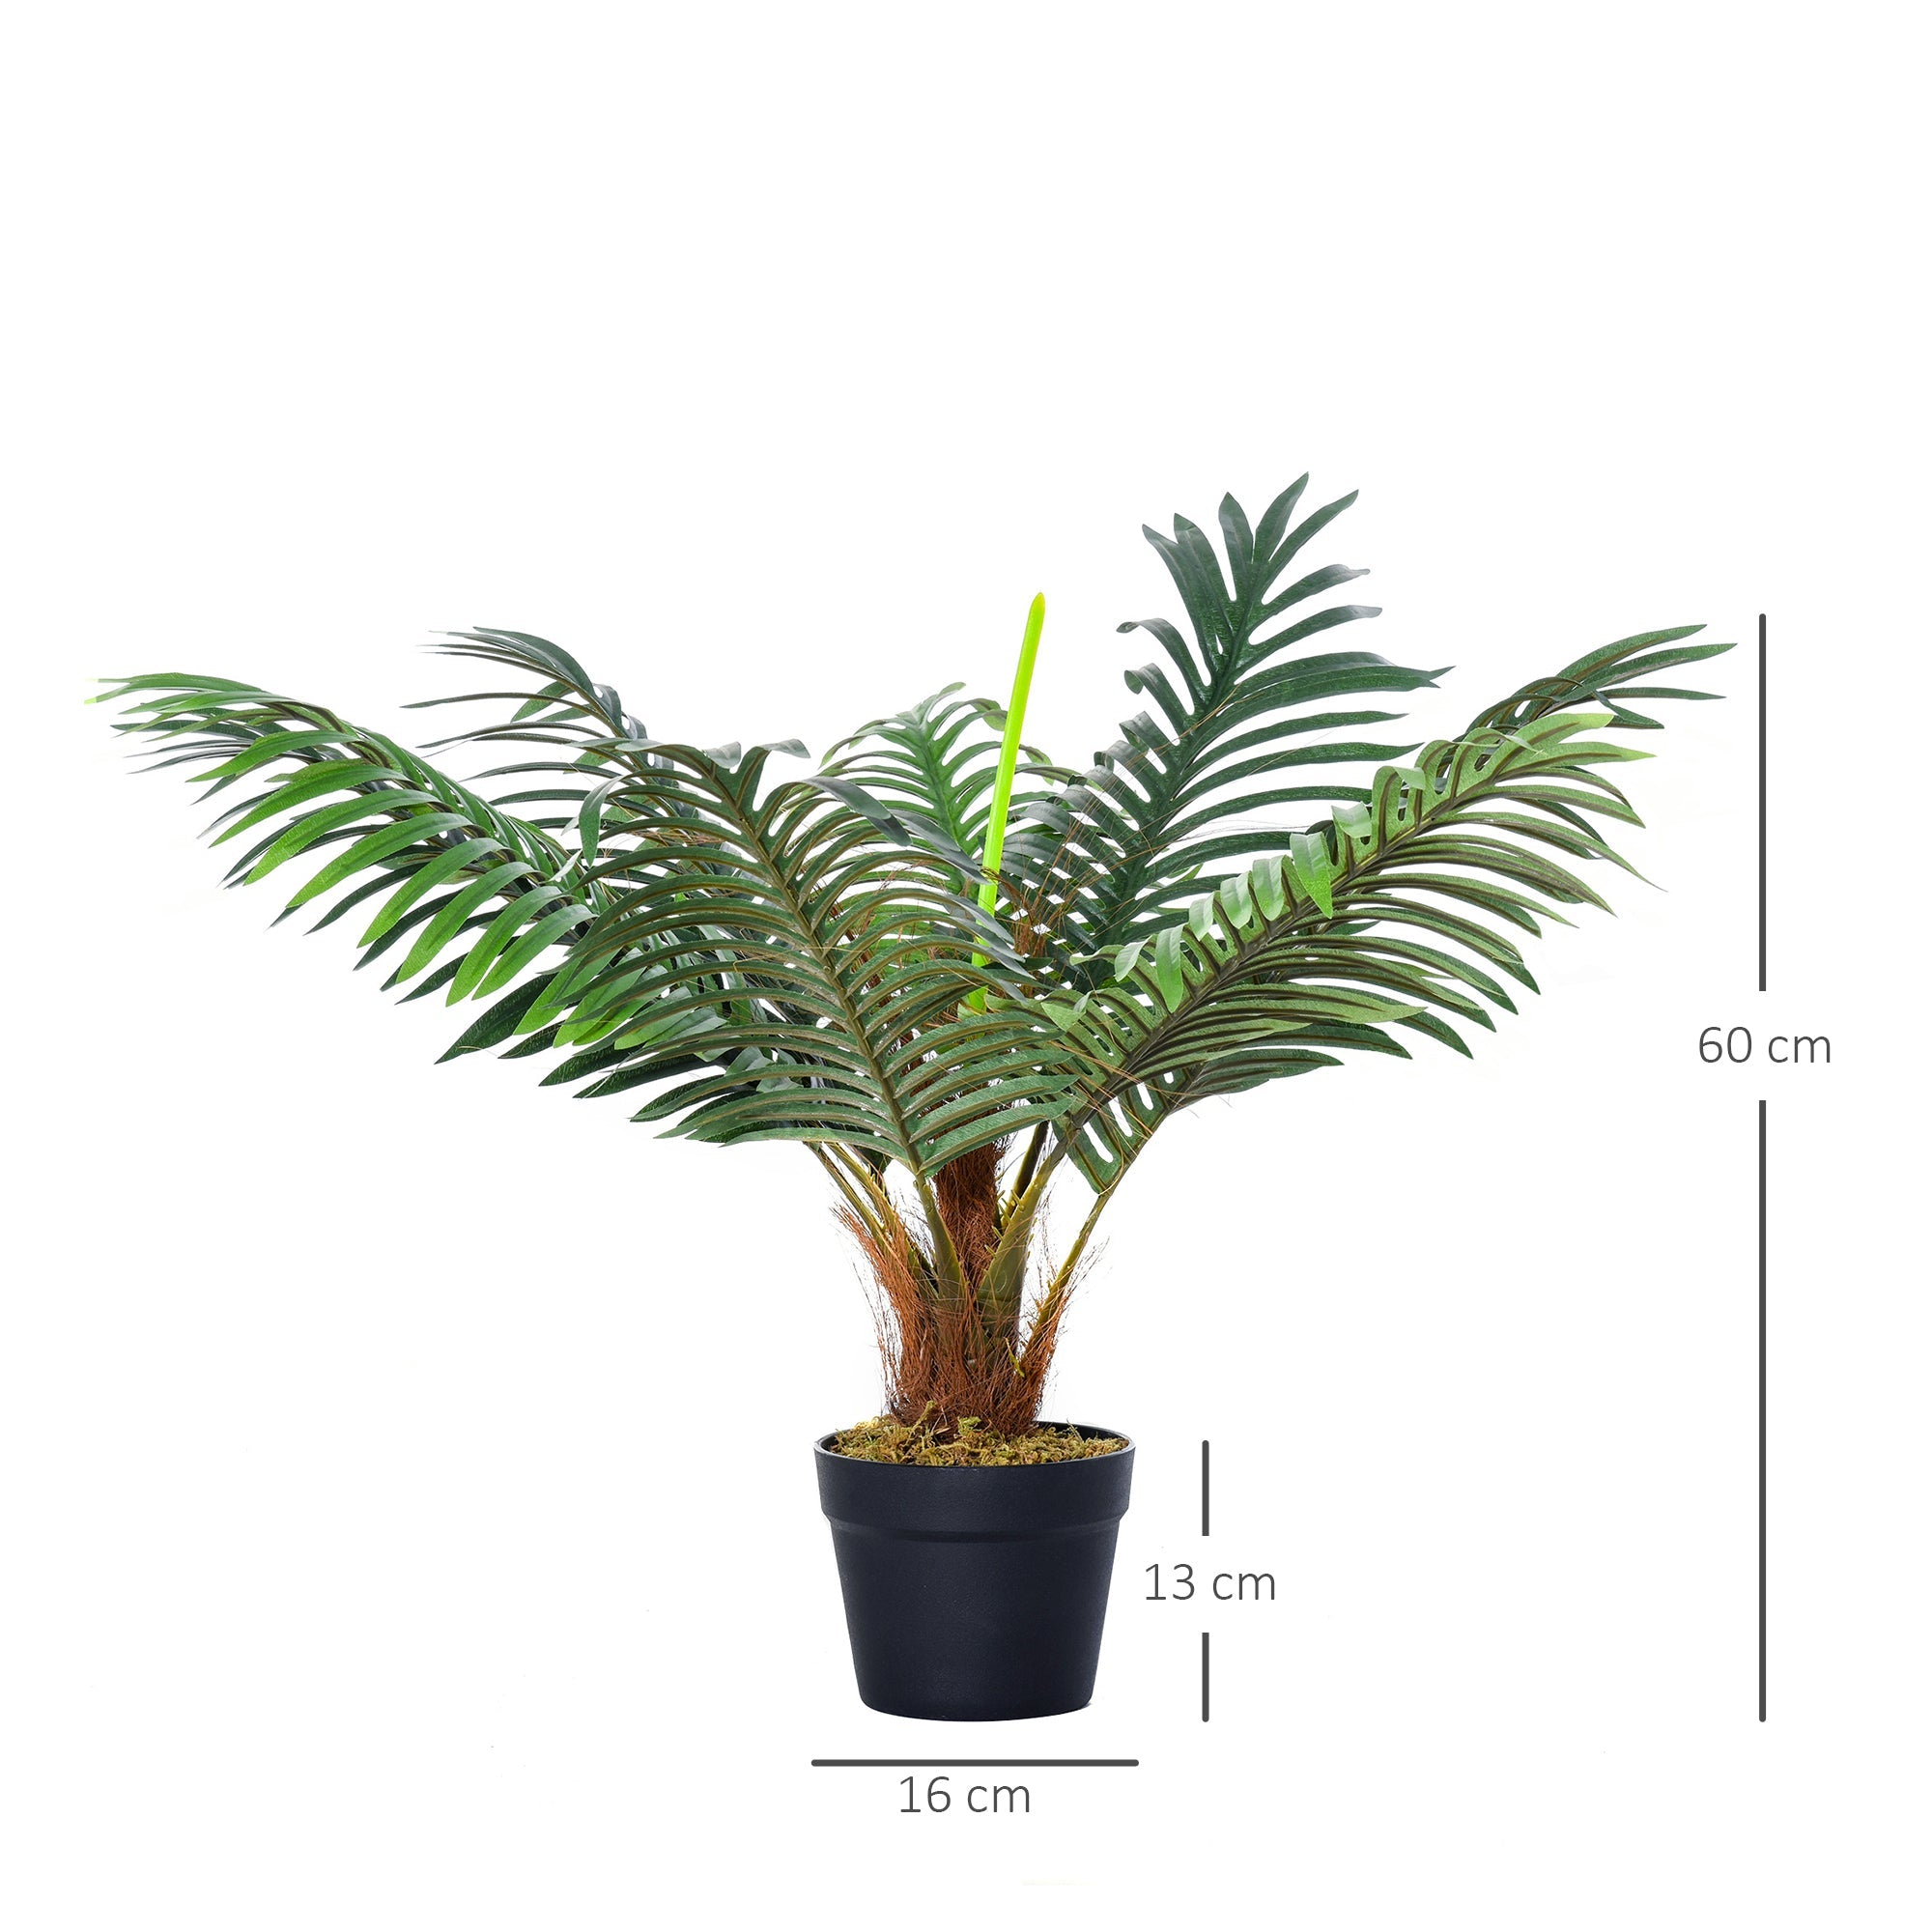 Artificial Palm Tree Decorative Plant 8 Leaves with Nursery Pot, Fake Tropical Tree for Indoor Outdoor Décor, 60cm-2